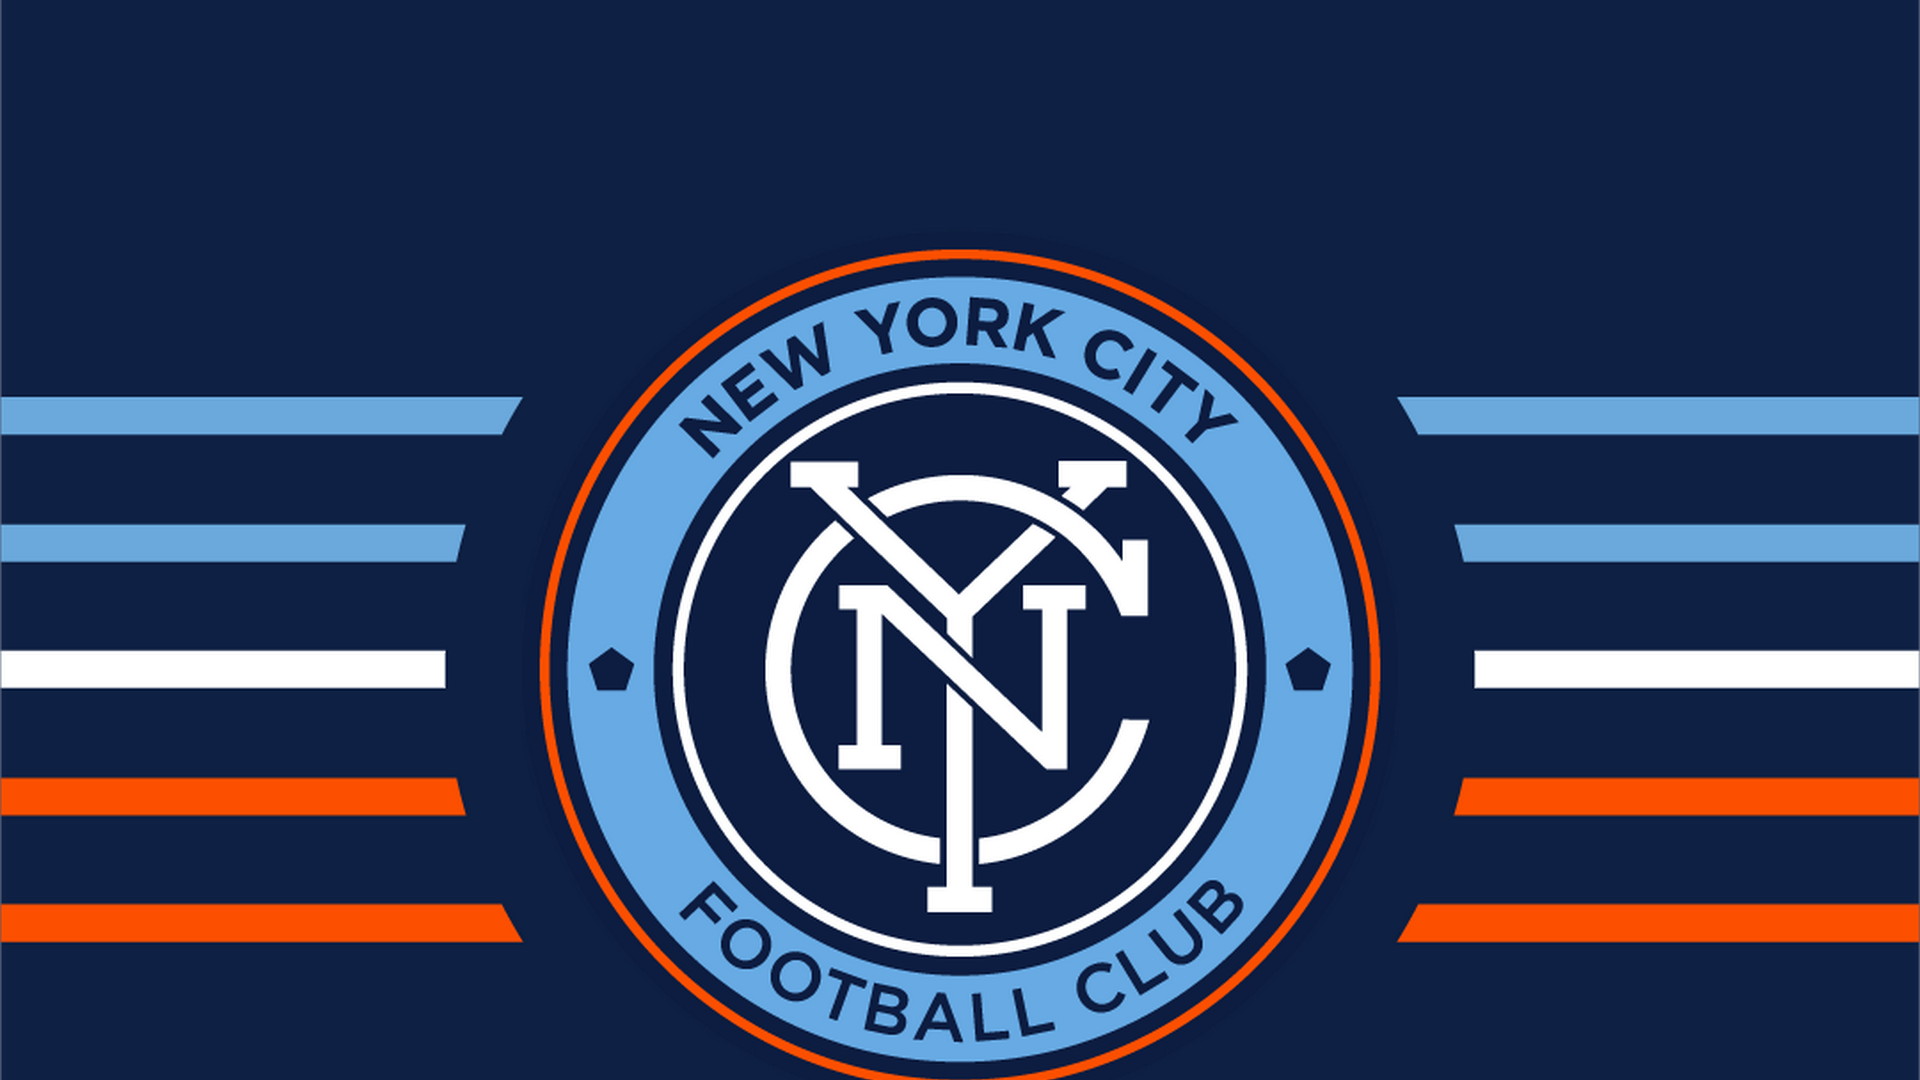 New York City FC Wallpaper HD With high-resolution 1920X1080 pixel. You can use this wallpaper for your Desktop Computers, Mac Screensavers, Windows Backgrounds, iPhone Wallpapers, Tablet or Android Lock screen and another Mobile device